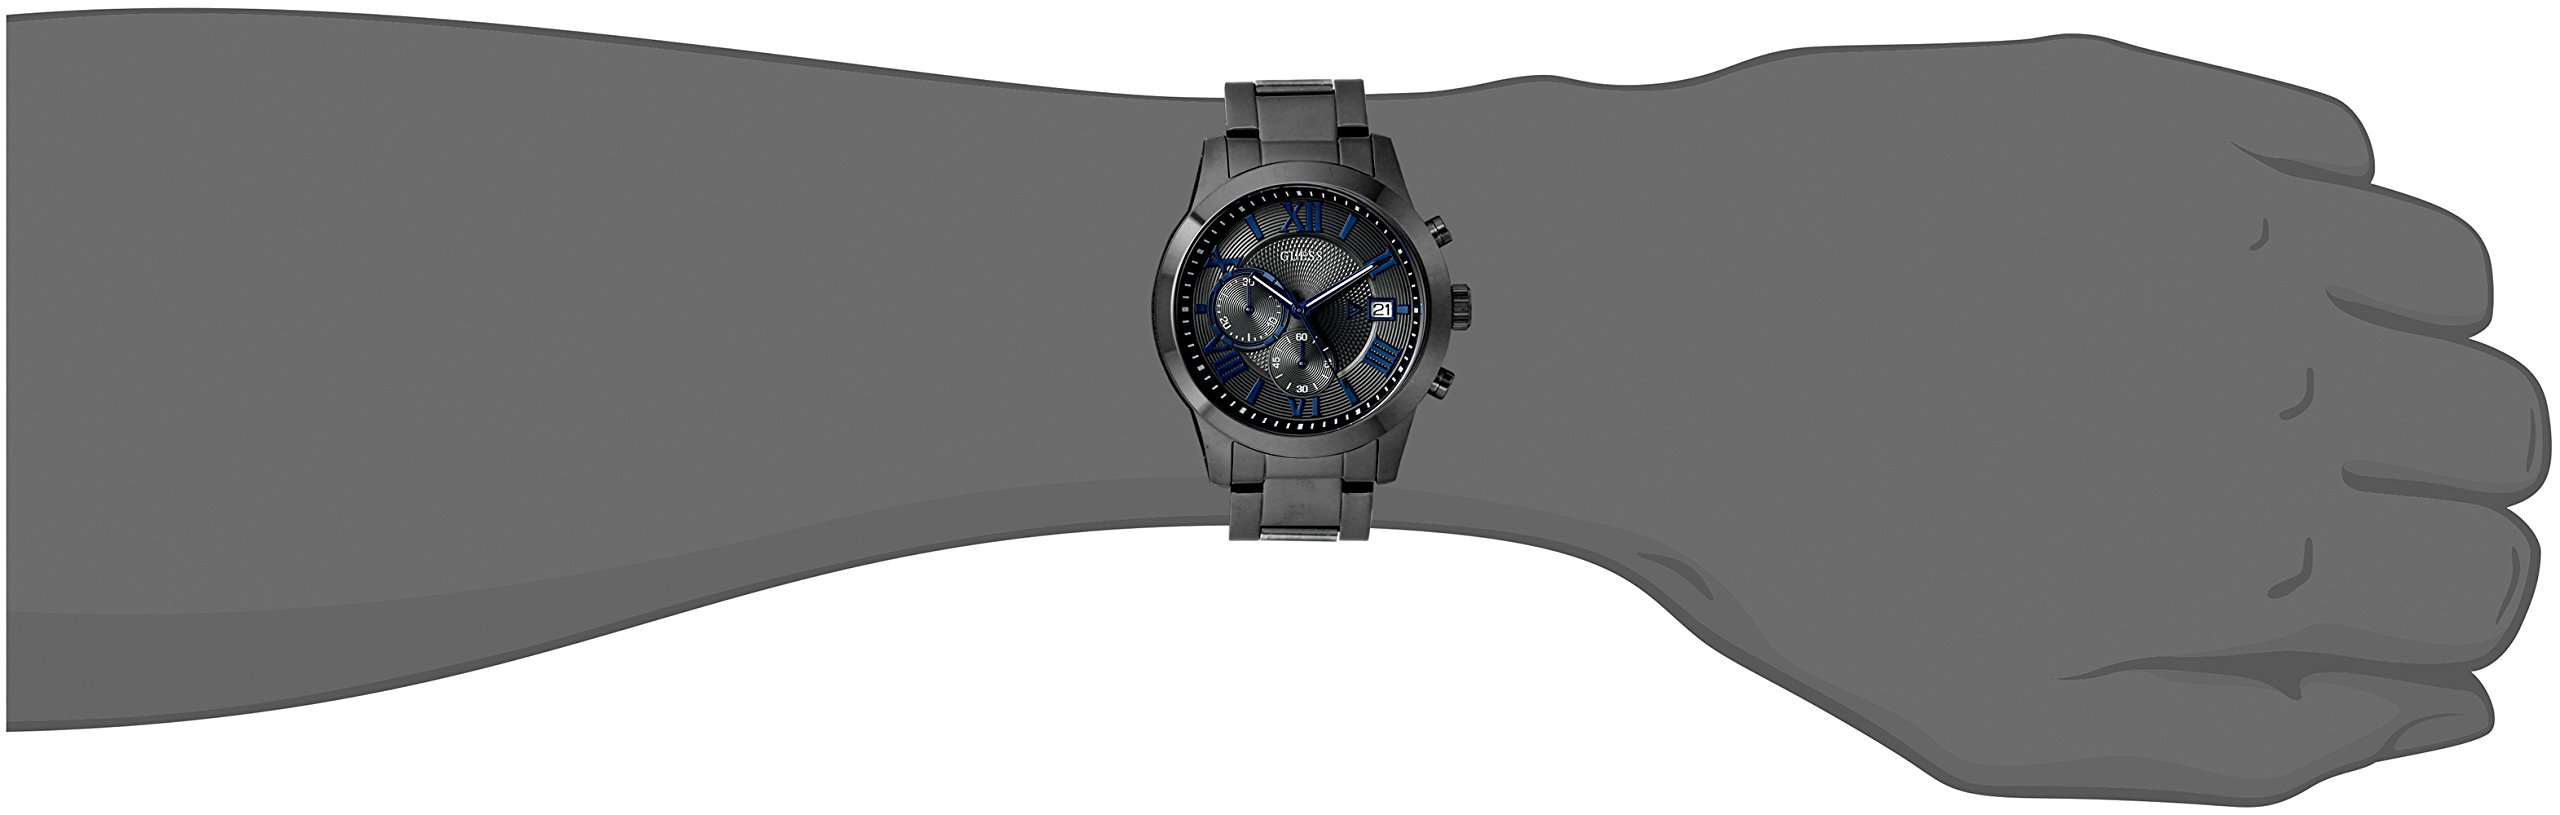 GUESS 45MM Stainless Steel Watch